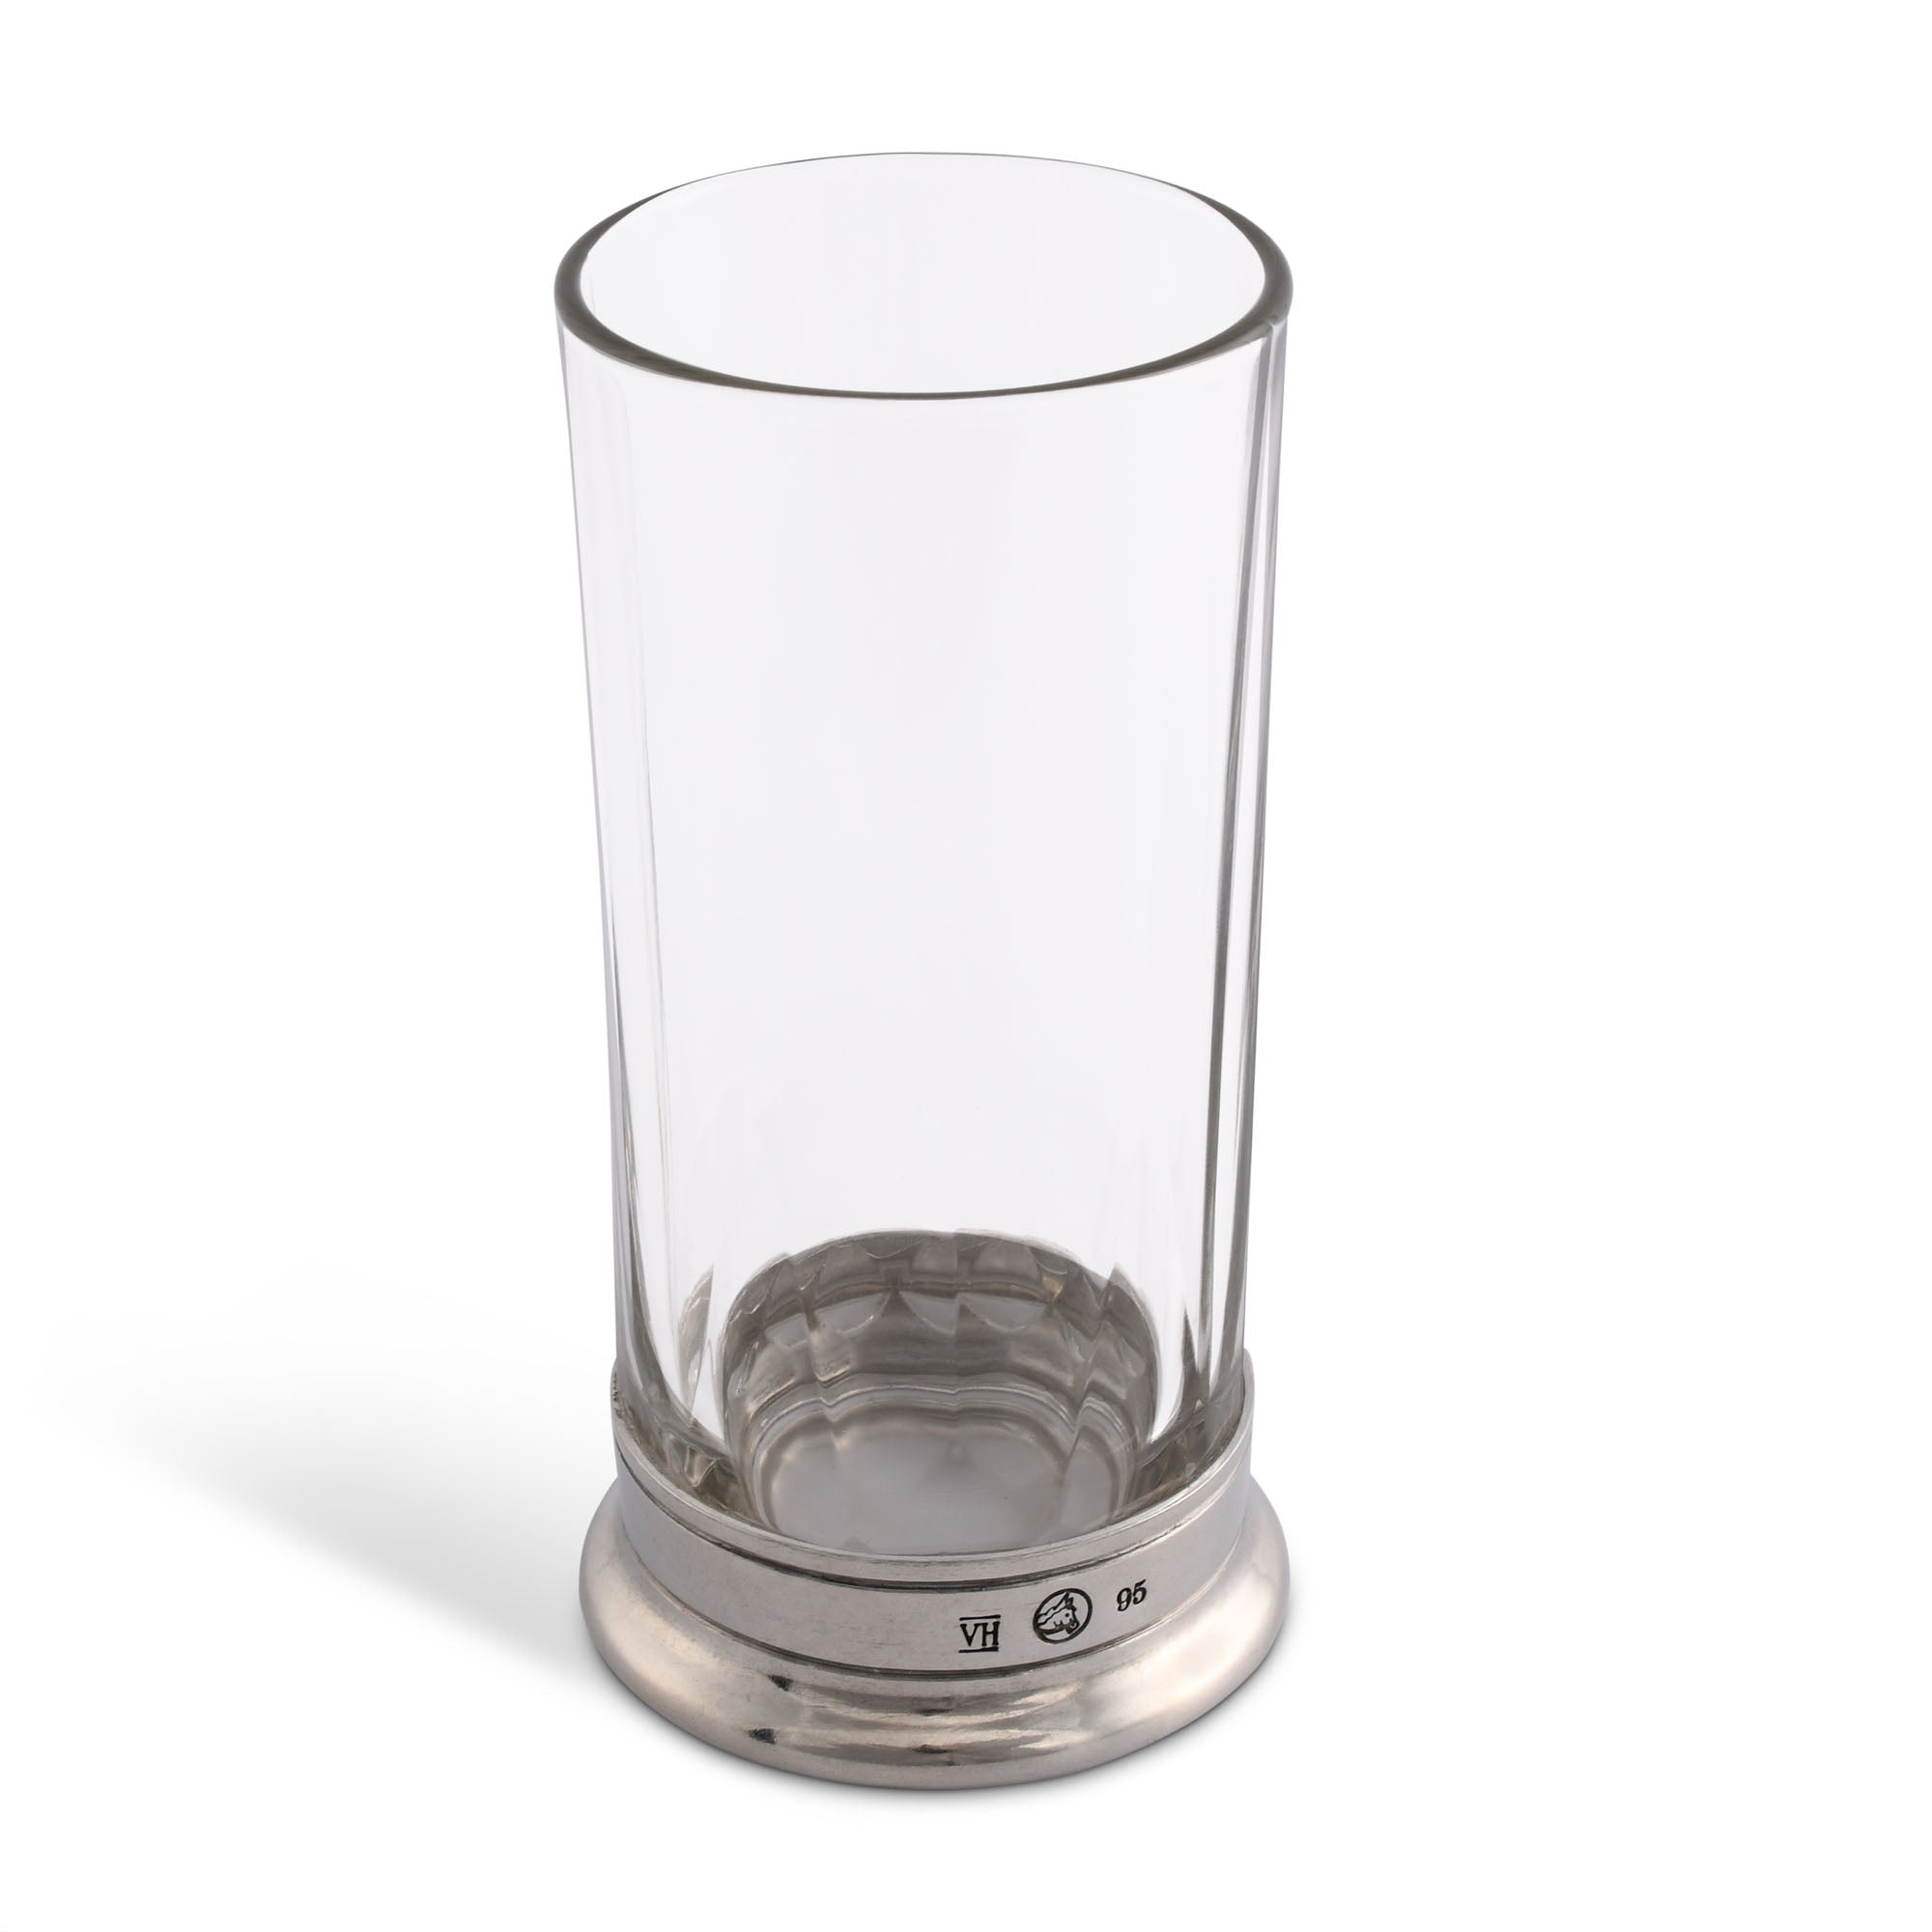 Vagabond House Highball - Hatched Glass Product Image